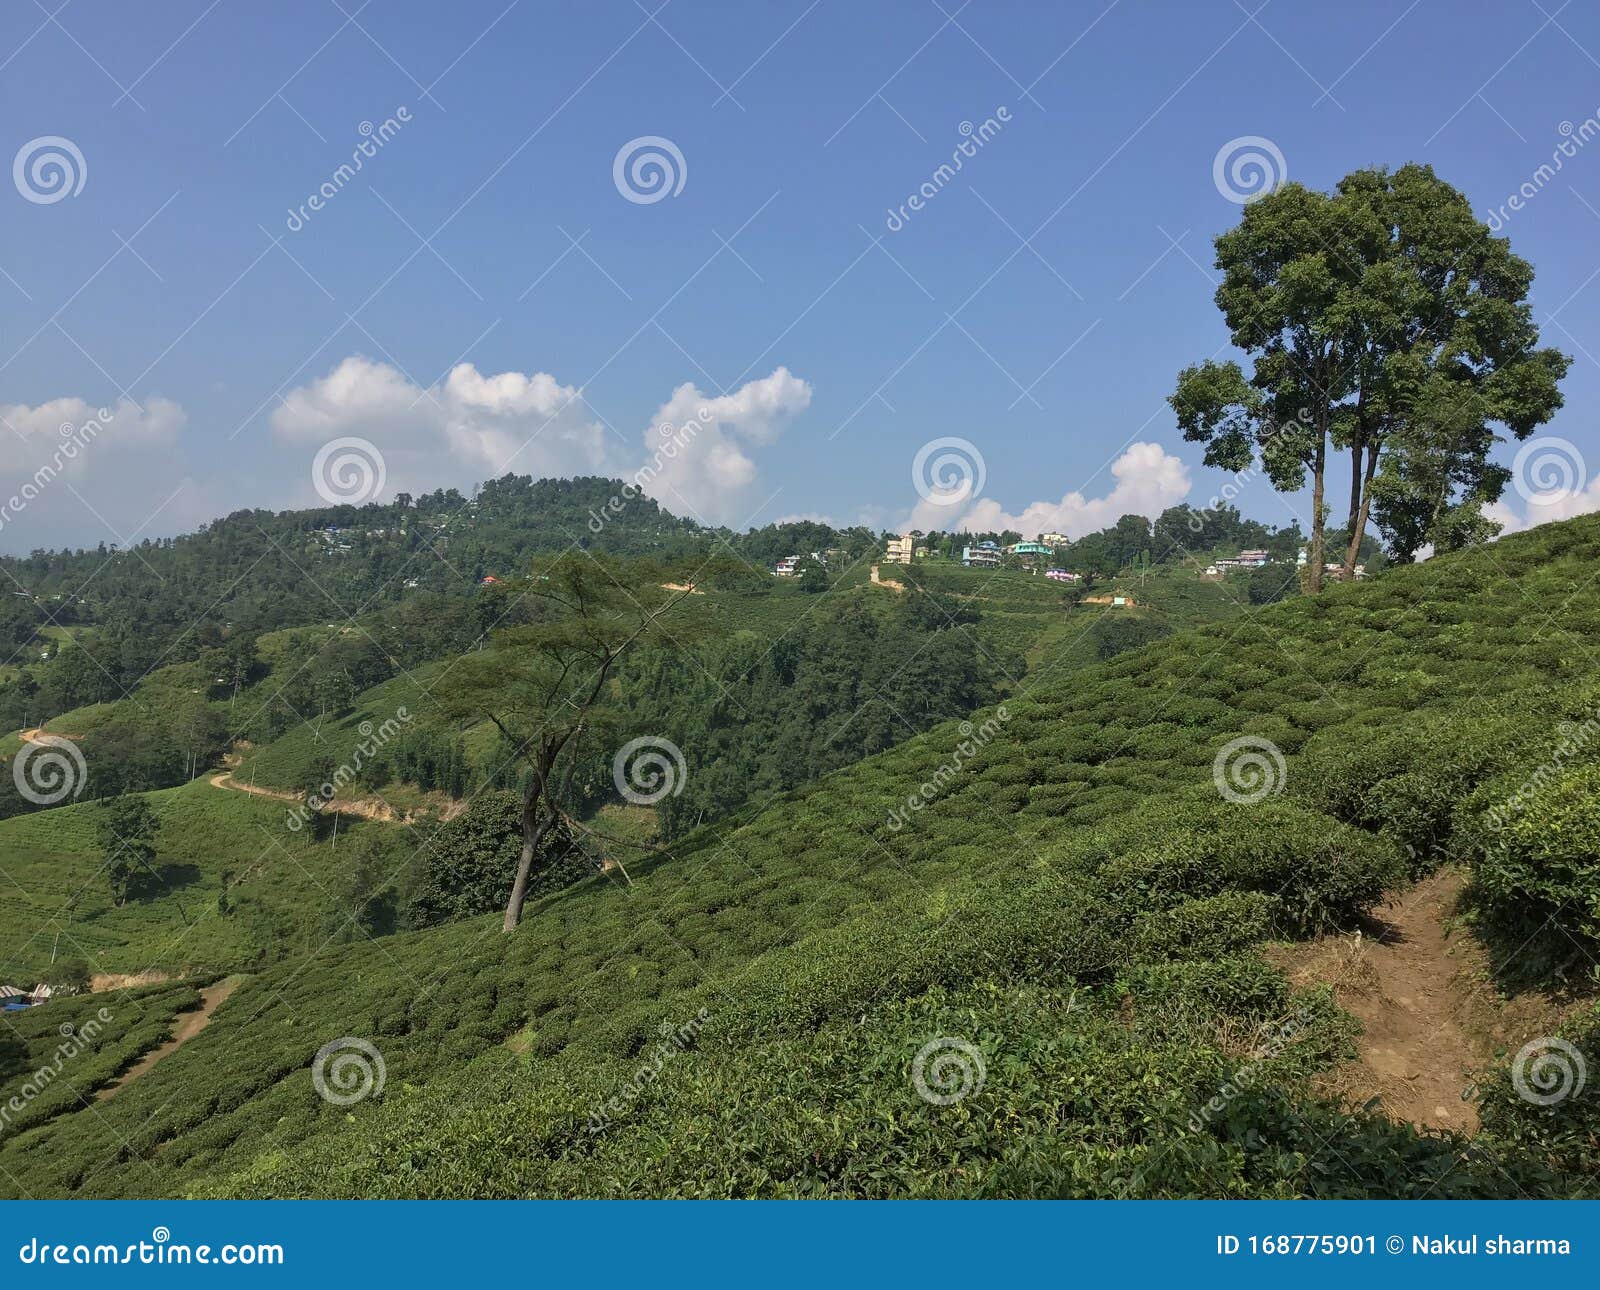 tea garden and natural beauty of environmental cleanness.